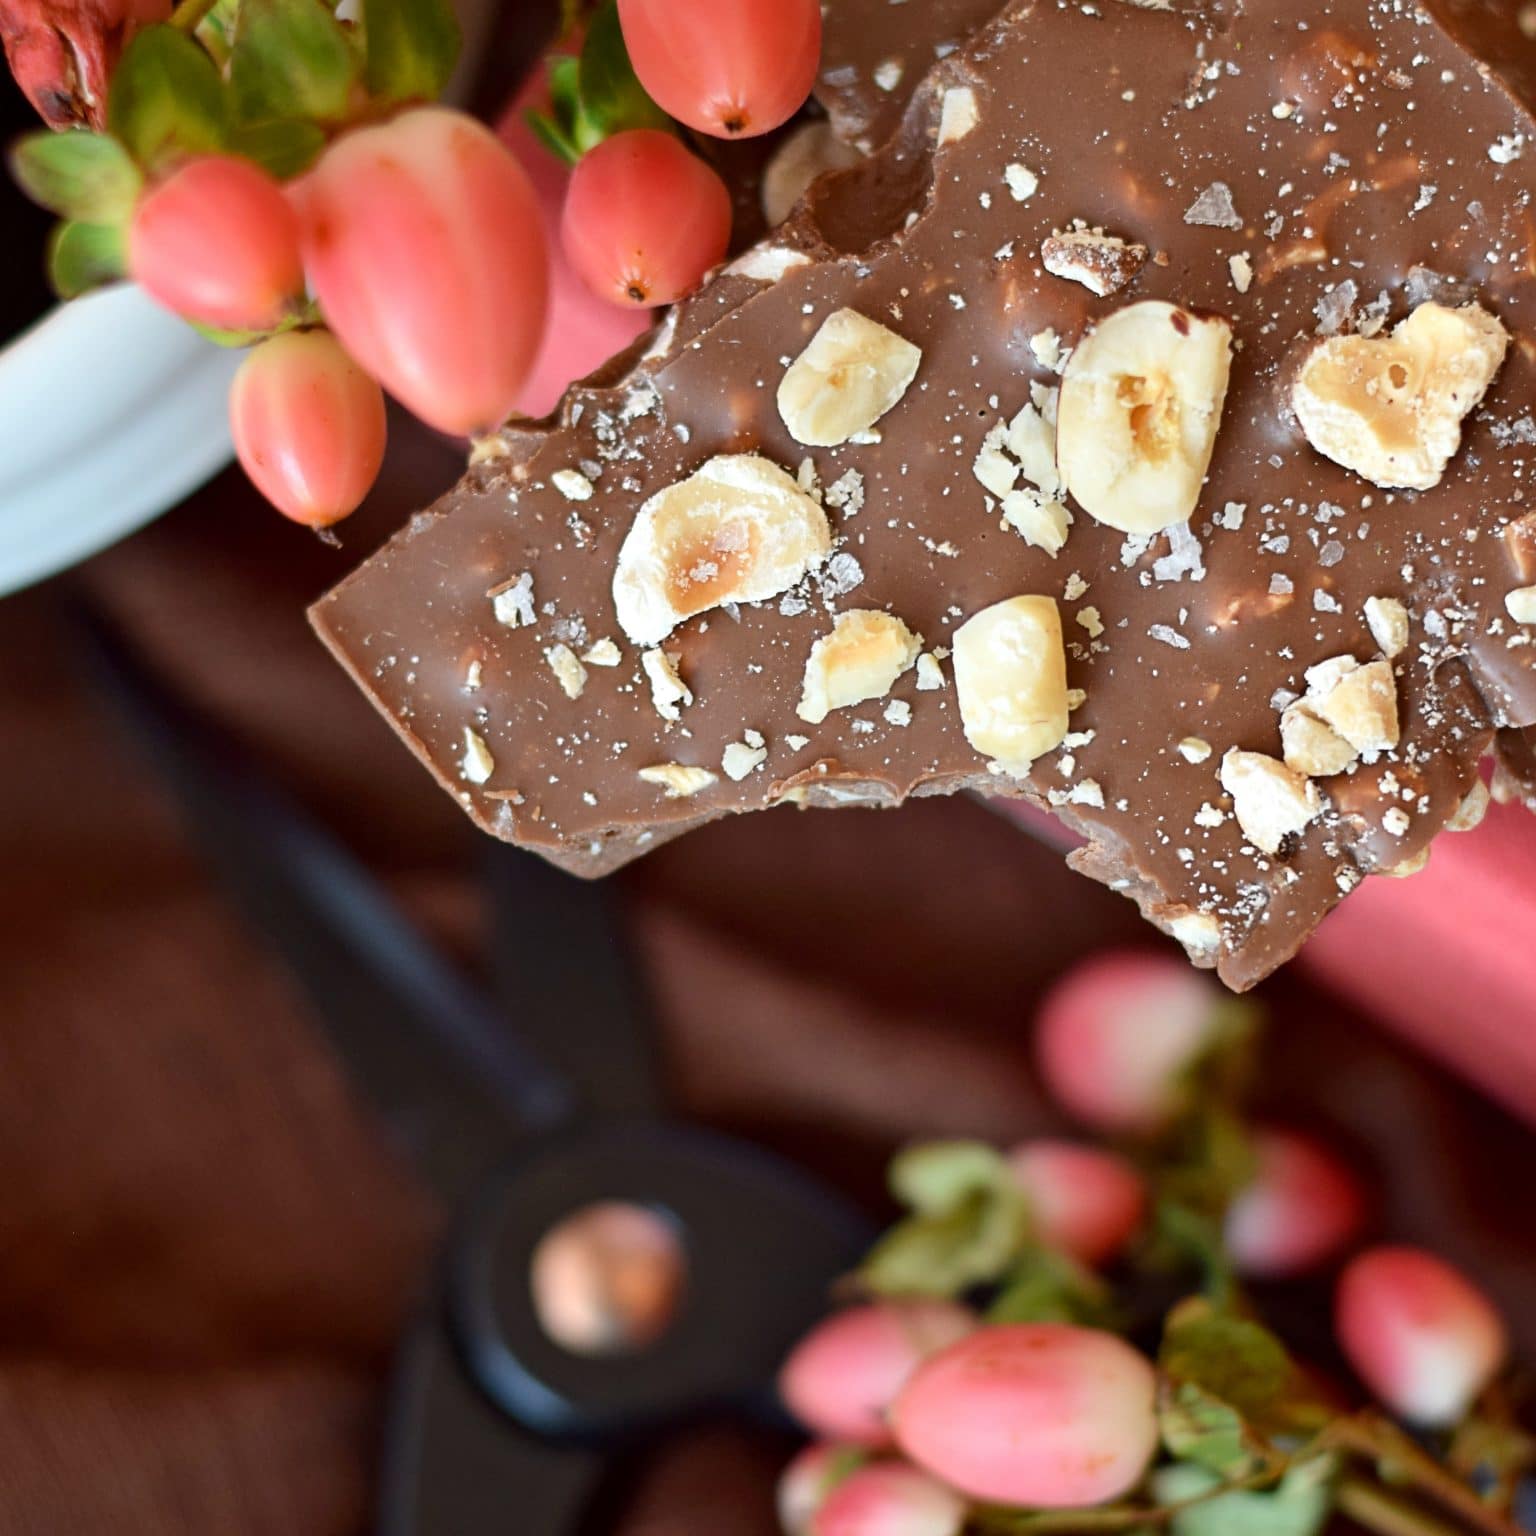 Piece of an artisan chocolate bar sitting on an pink book with pink flowers surrounding the bar. The milk chocolate bar is topped with pieces of salted hazelnuts